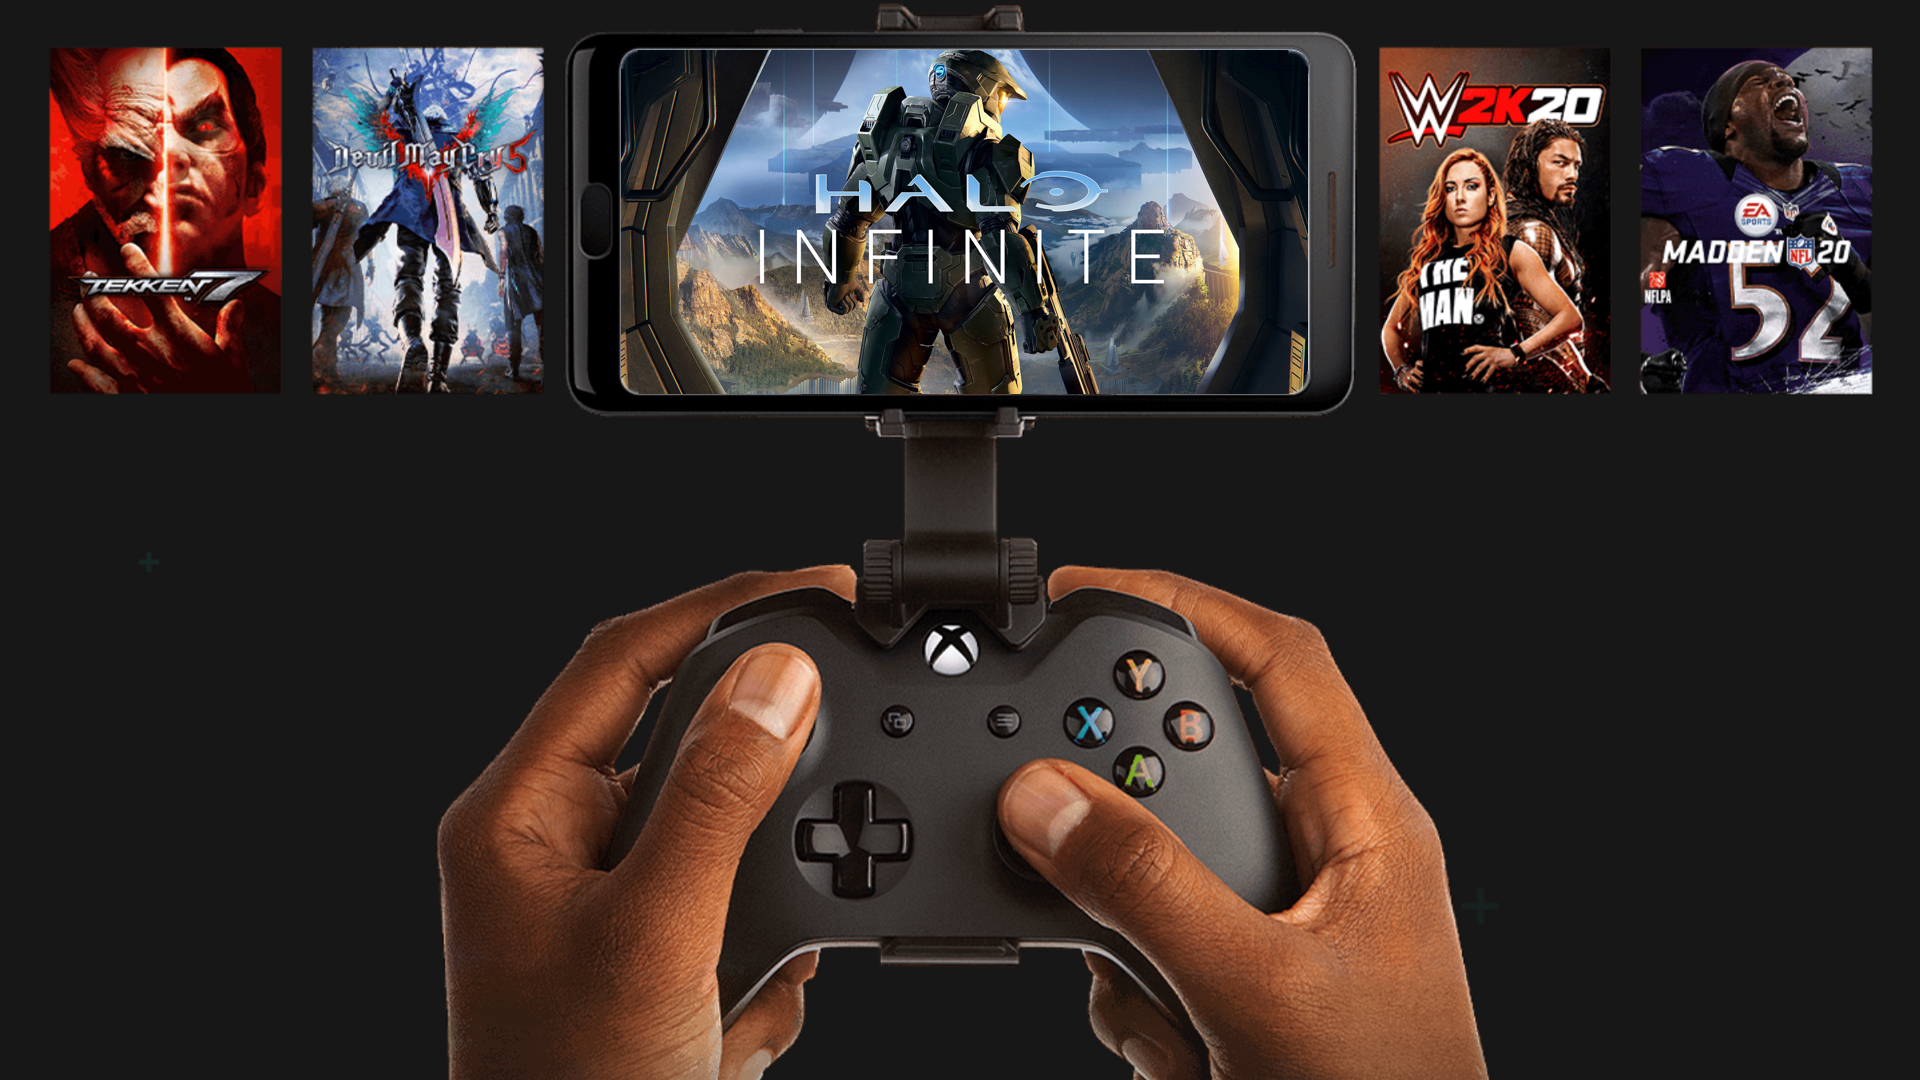 Promotional image of game streaming via Xbox Game Pass.